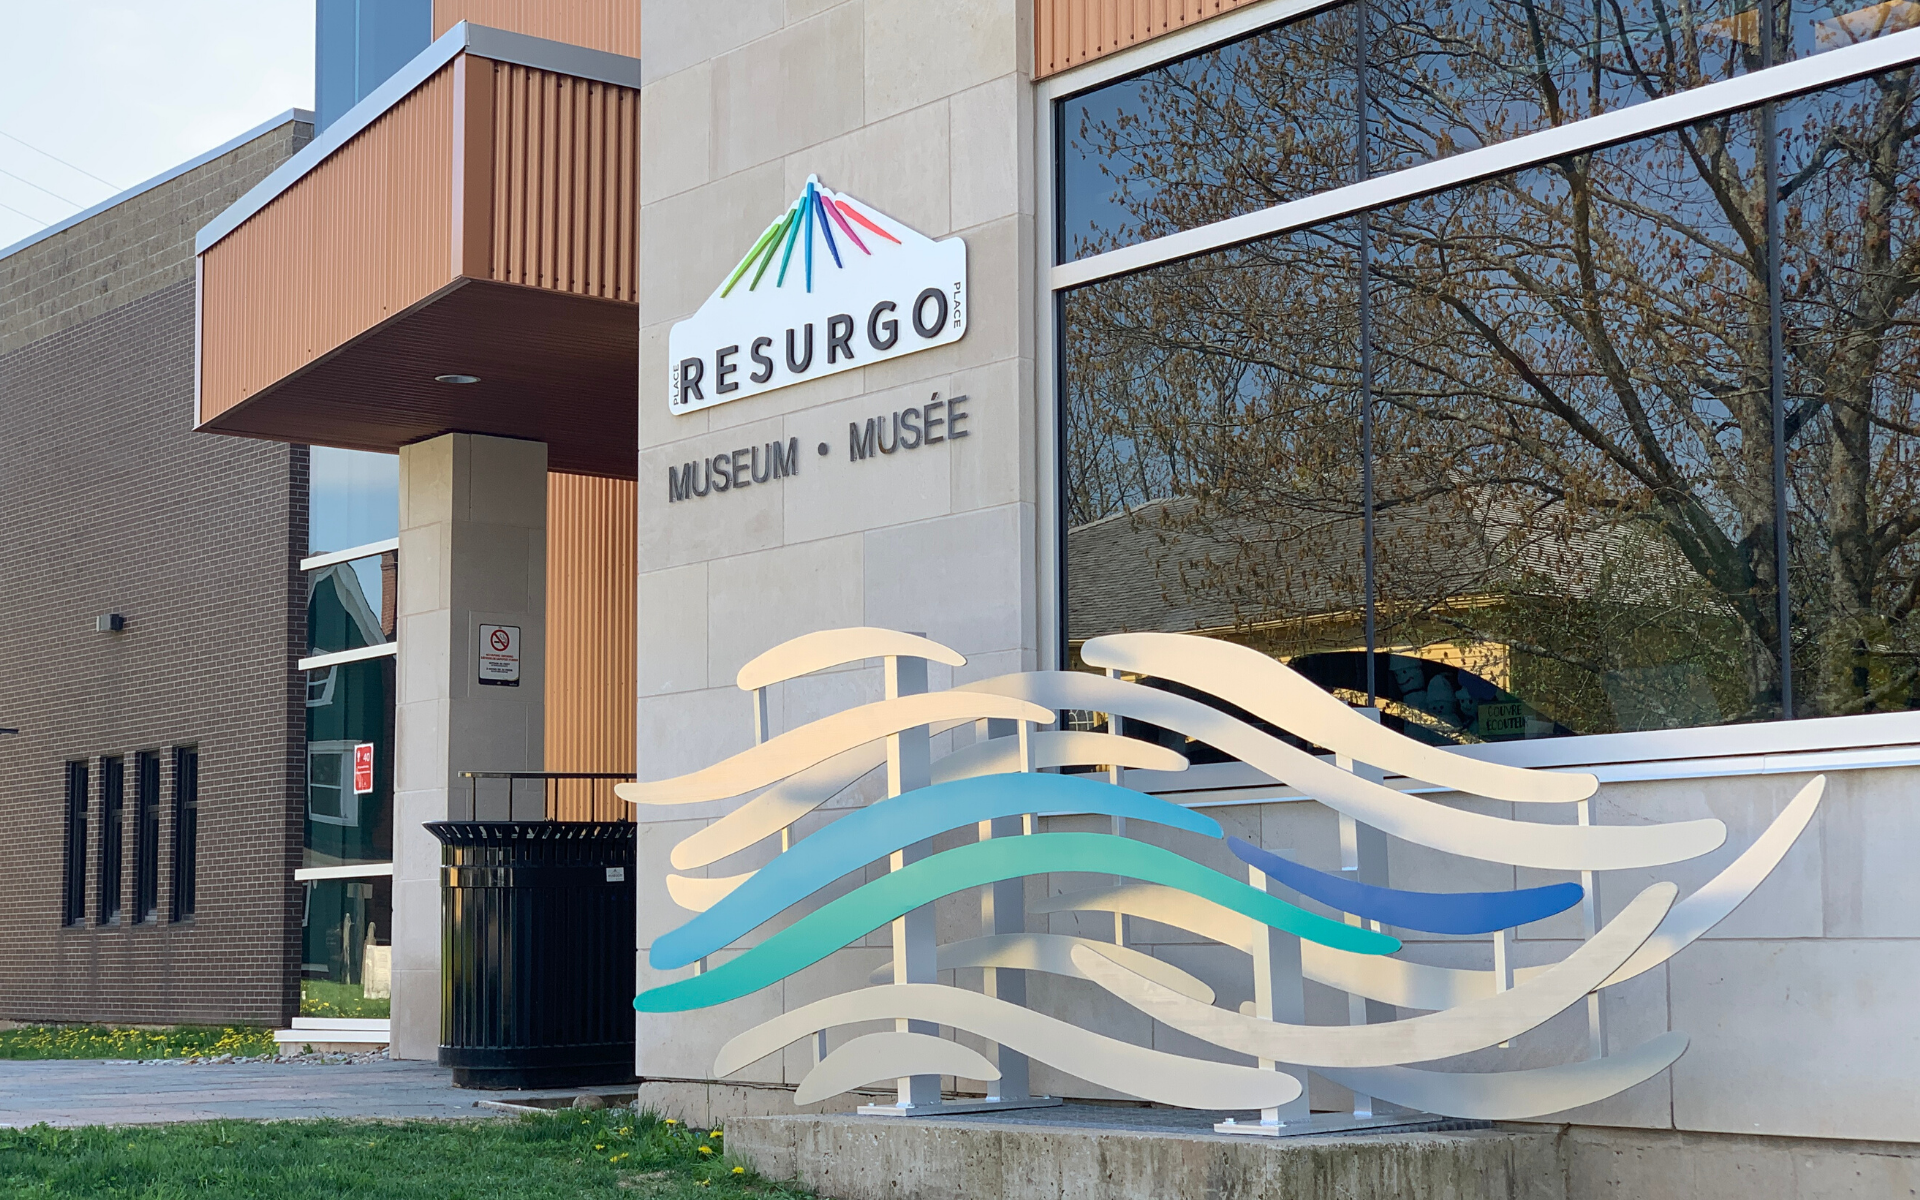 A sculptural work installed outside the Resurgo Place in Moncton, New Brunswick, Canada, consists of multiple wave-like shapes, one of which is turquoise, blue, and light blue.